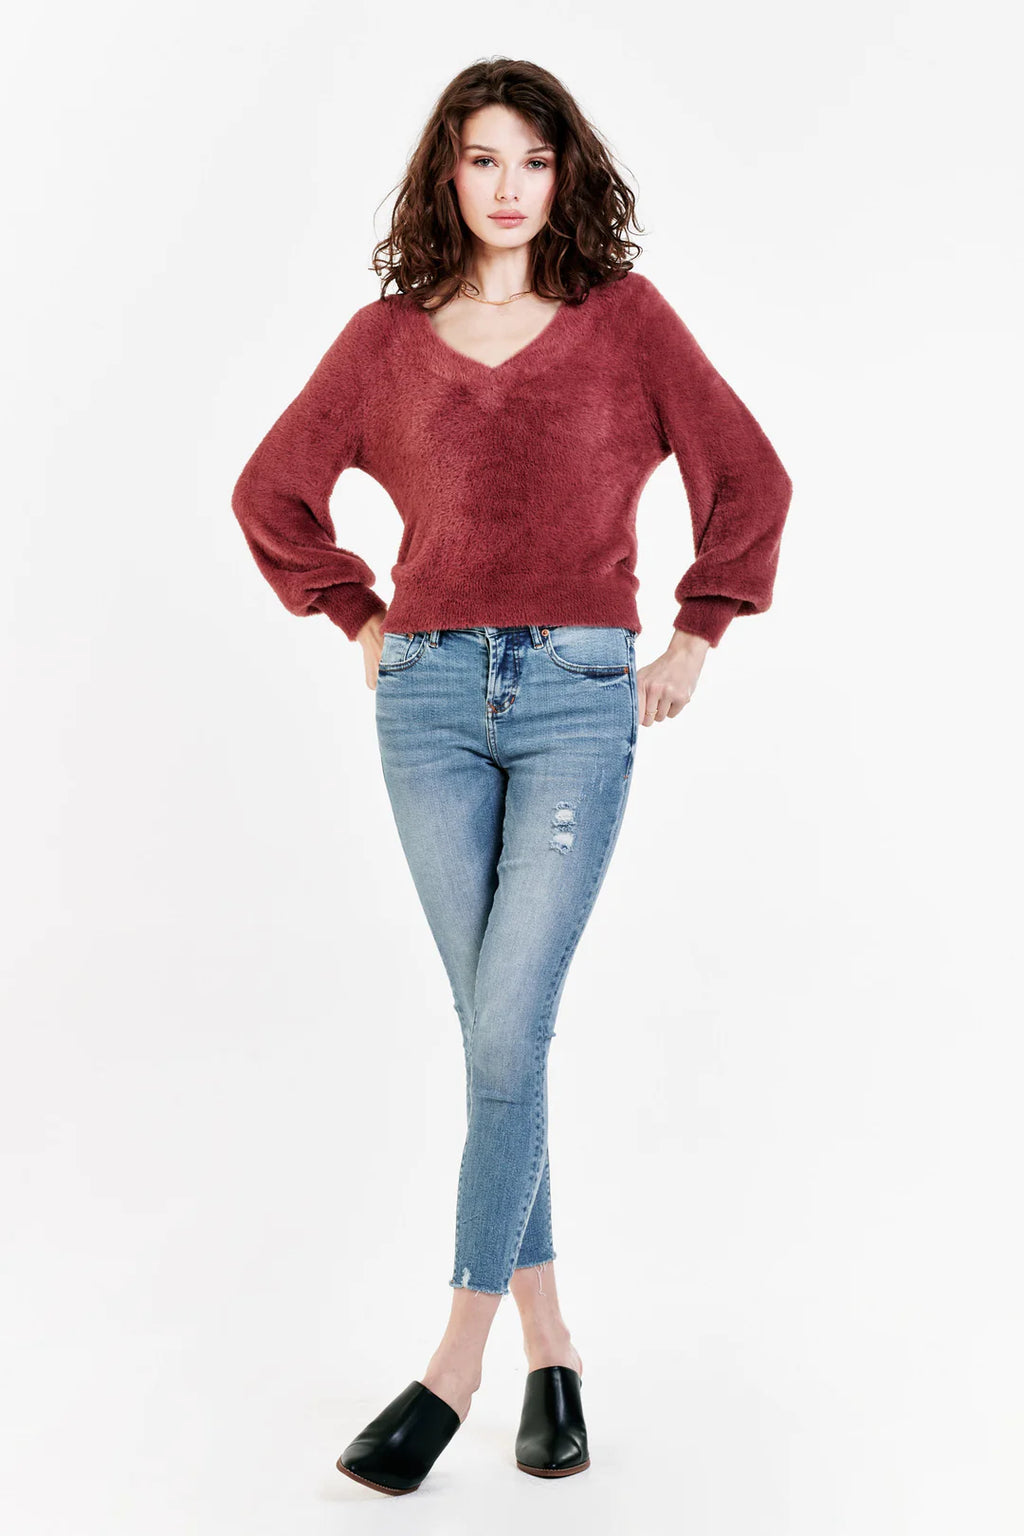 Dear John - Valli Plush Sweater in Withered Rose